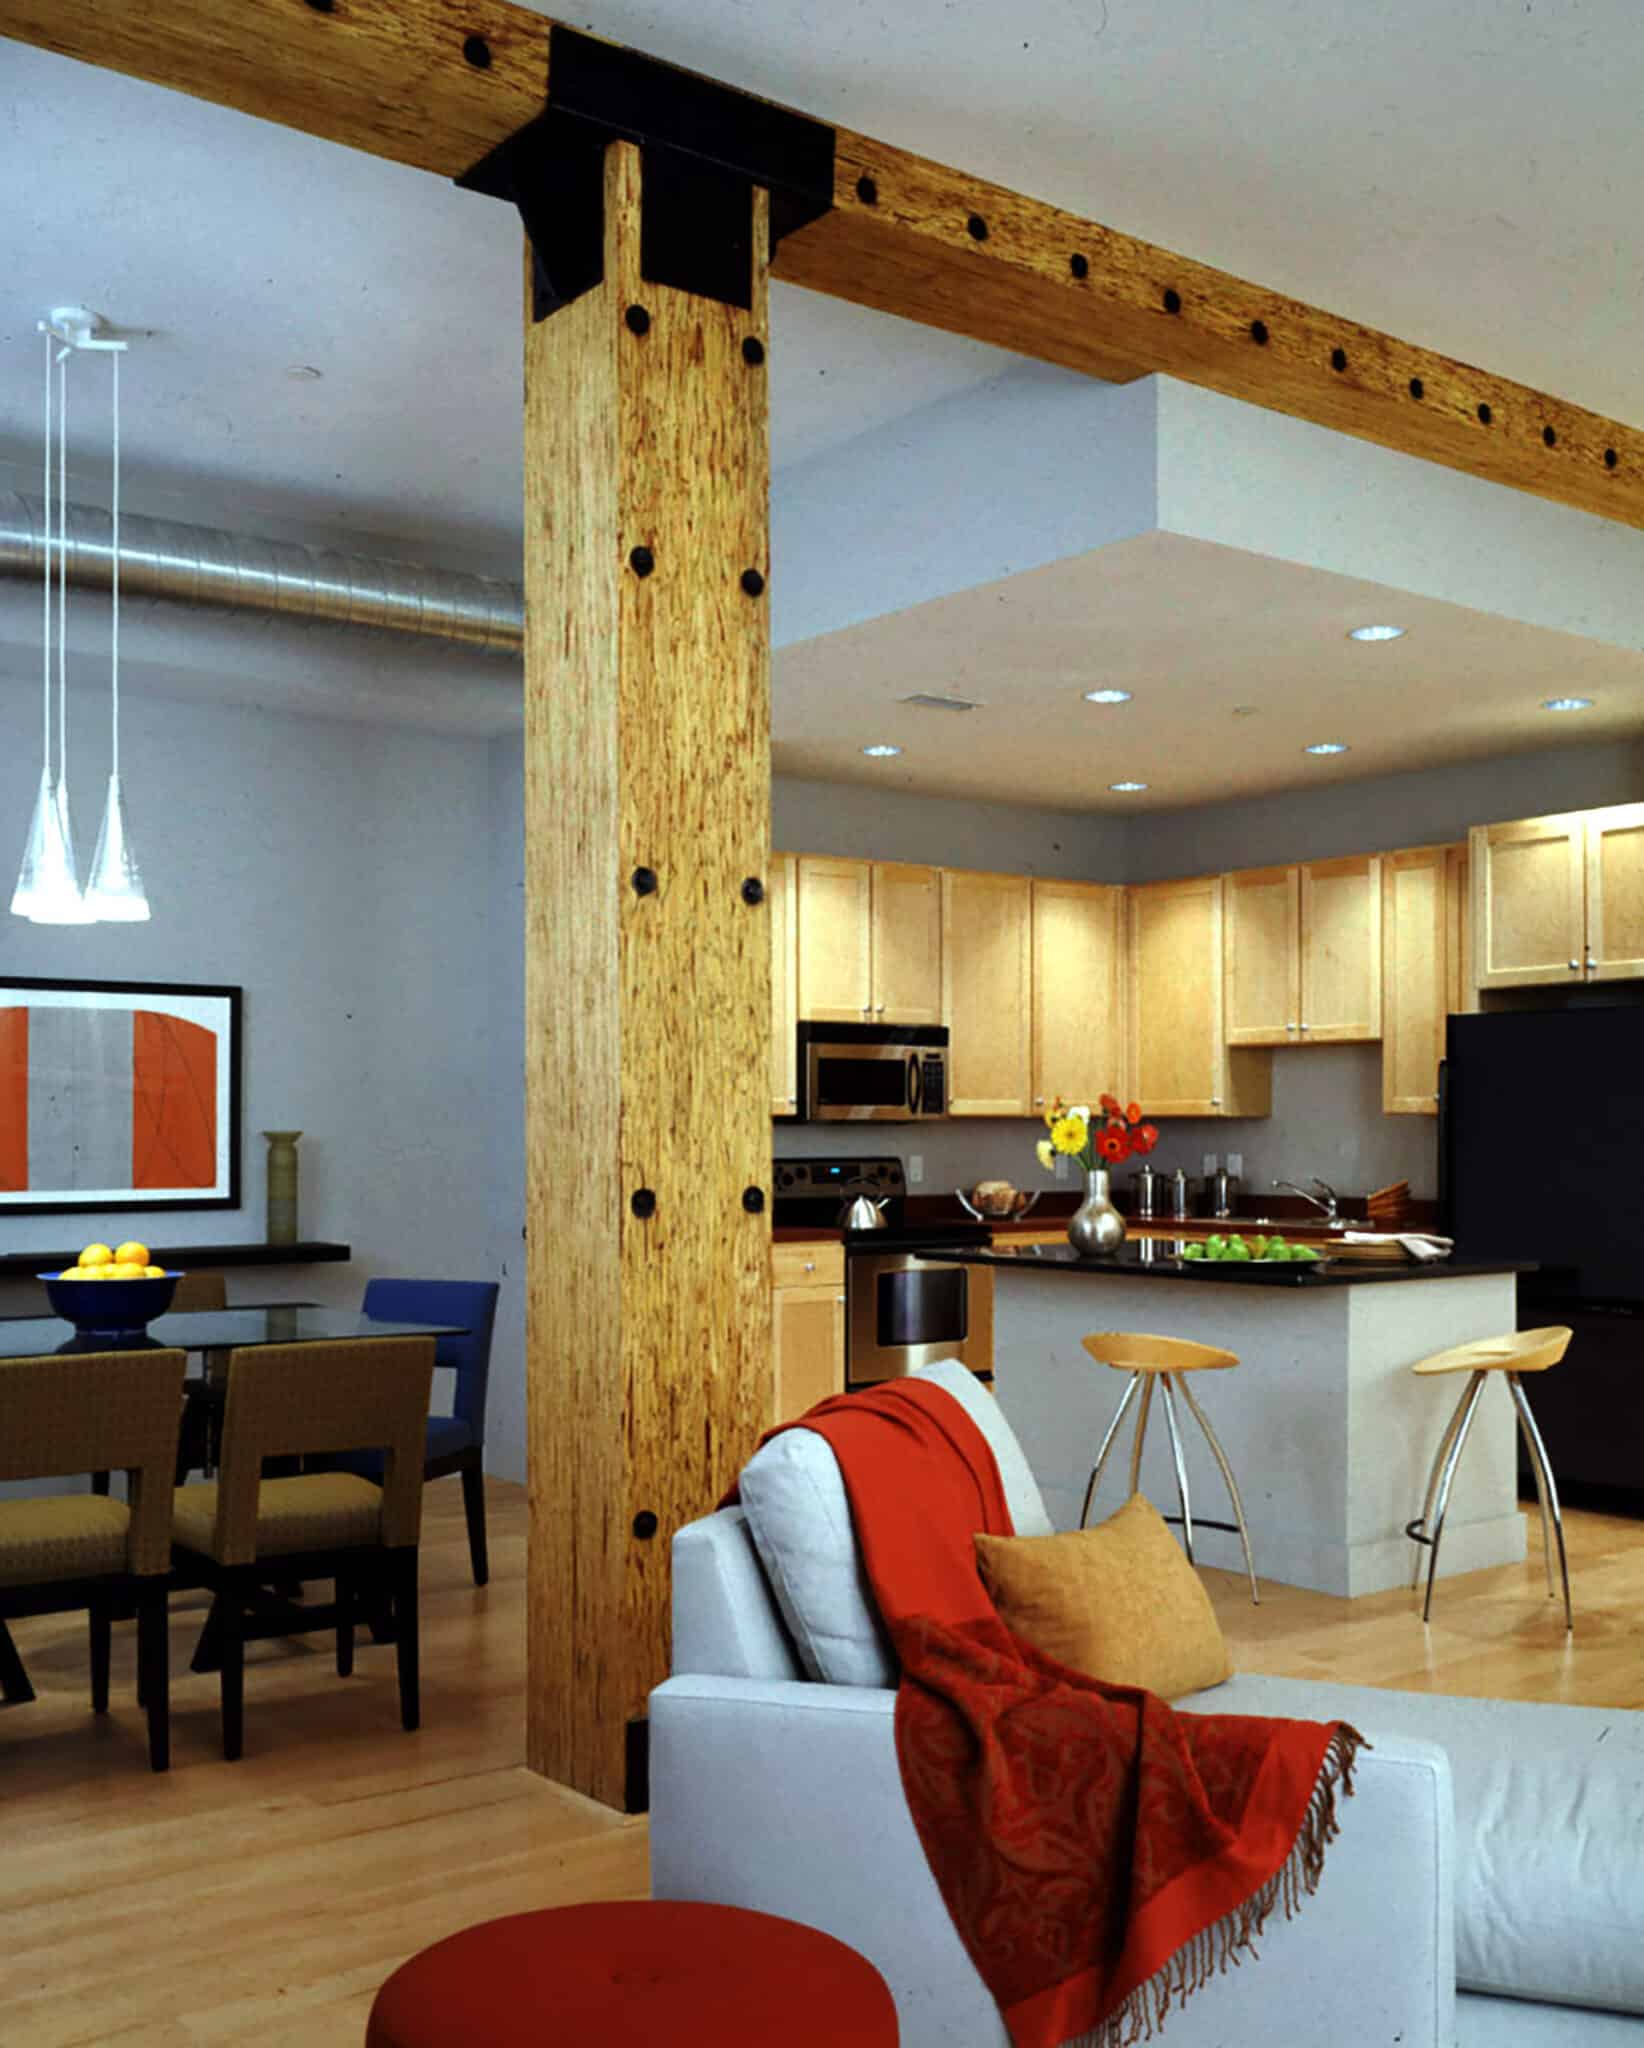 interior of hi-pointe lofts designed by trivers architectural firm in st. louis